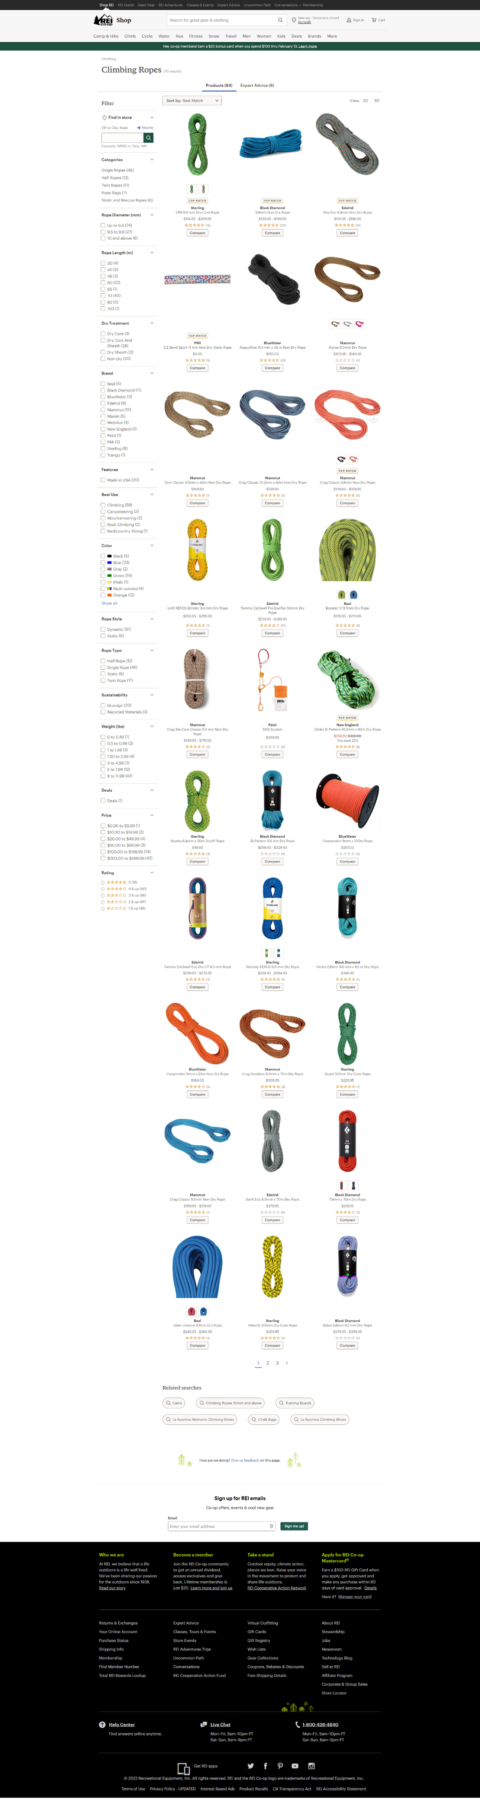 Landing page of REI climbing rope products